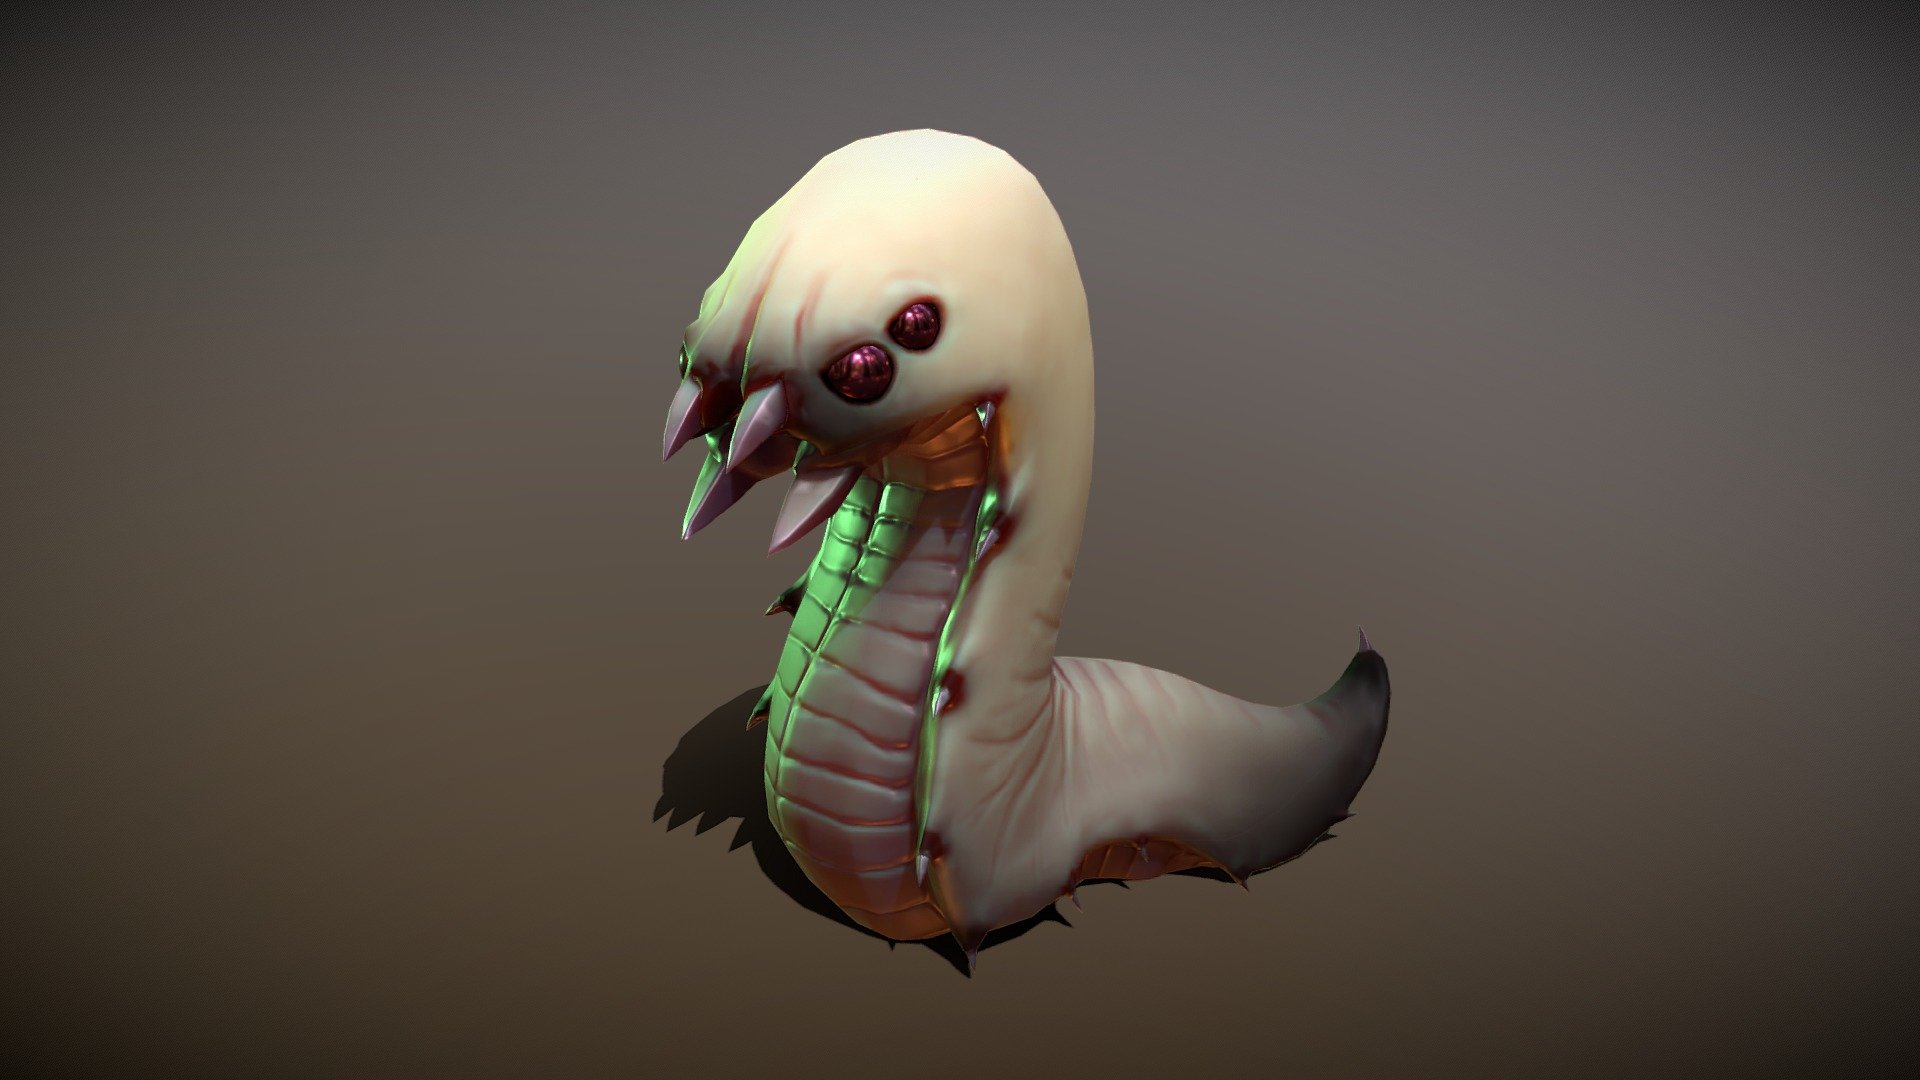 An enemy for the game SpellRogue.

Check it out on steam:
https://store.steampowered.com/app/1990110/SpellRogue/ - SpellRogue: Grub - 3D model by Tim Skafte (@timskafte) 3d model